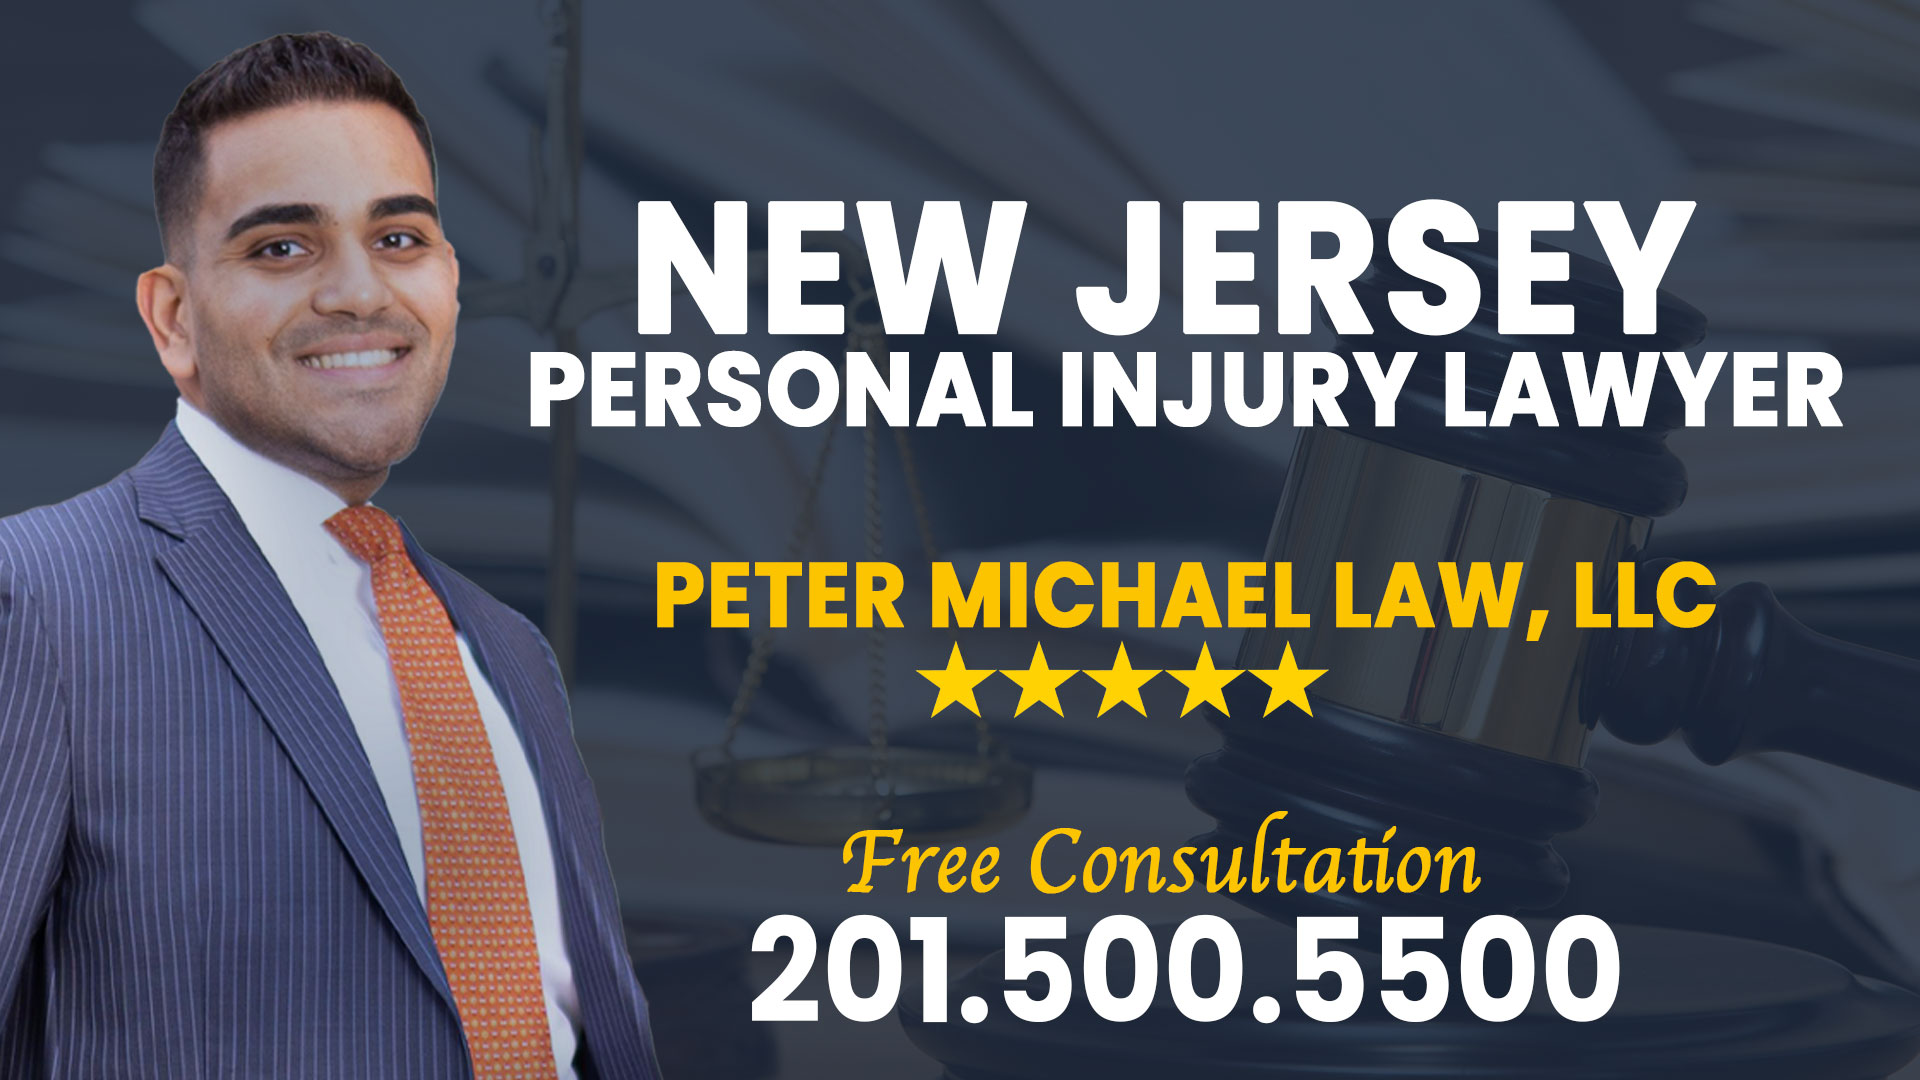 Experienced New Jersey Personal Injury Lawyer, Peter Michael Law, LLC NJ Accident & Injury Lawyers – Top-Rated NJ Injury Lawyers for Car Accident, Slip and fall accident, Nursing Home Neglect – ABNewswire